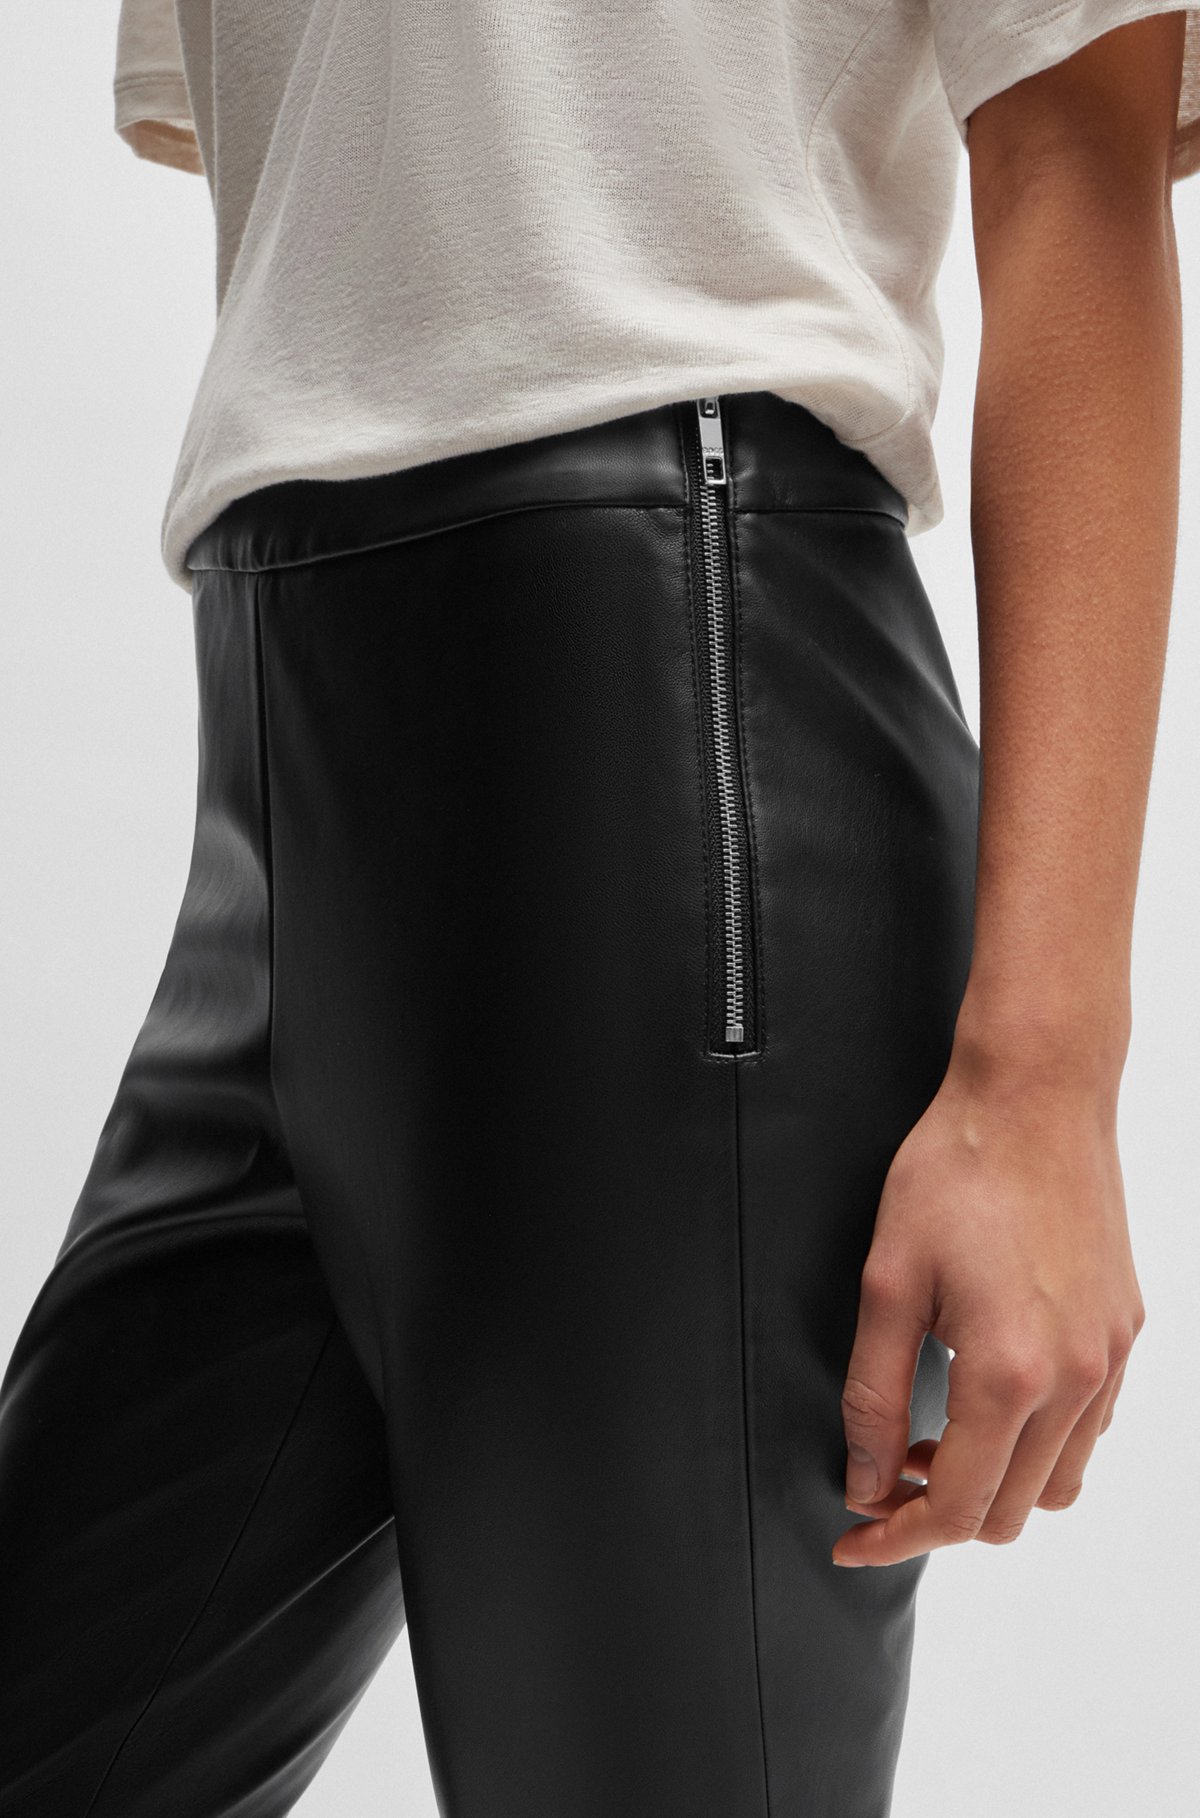 Skinny-fit high-waisted trousers with side zip, Black